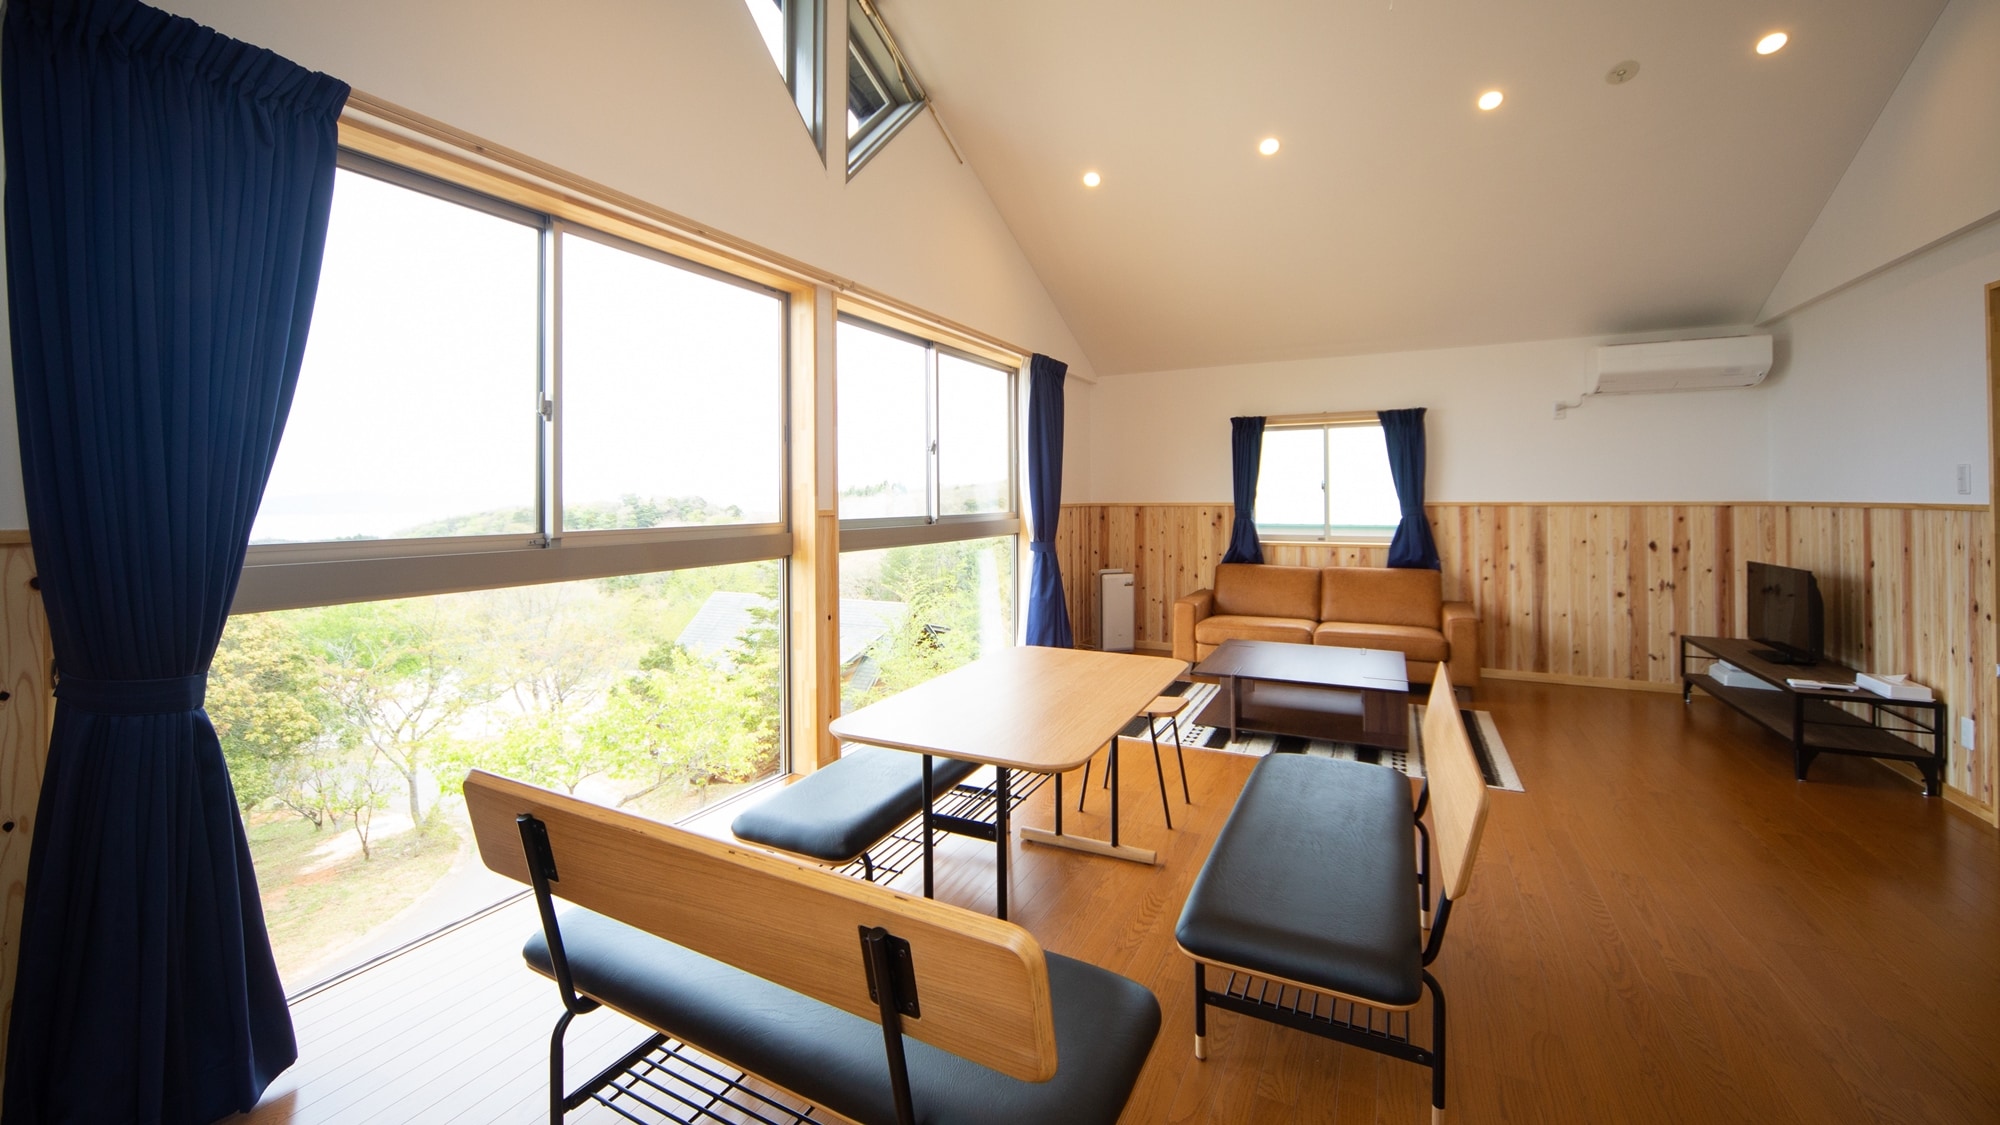 * [Lake View Cottage] The large windows give the room a sunny and refreshing sunshine.